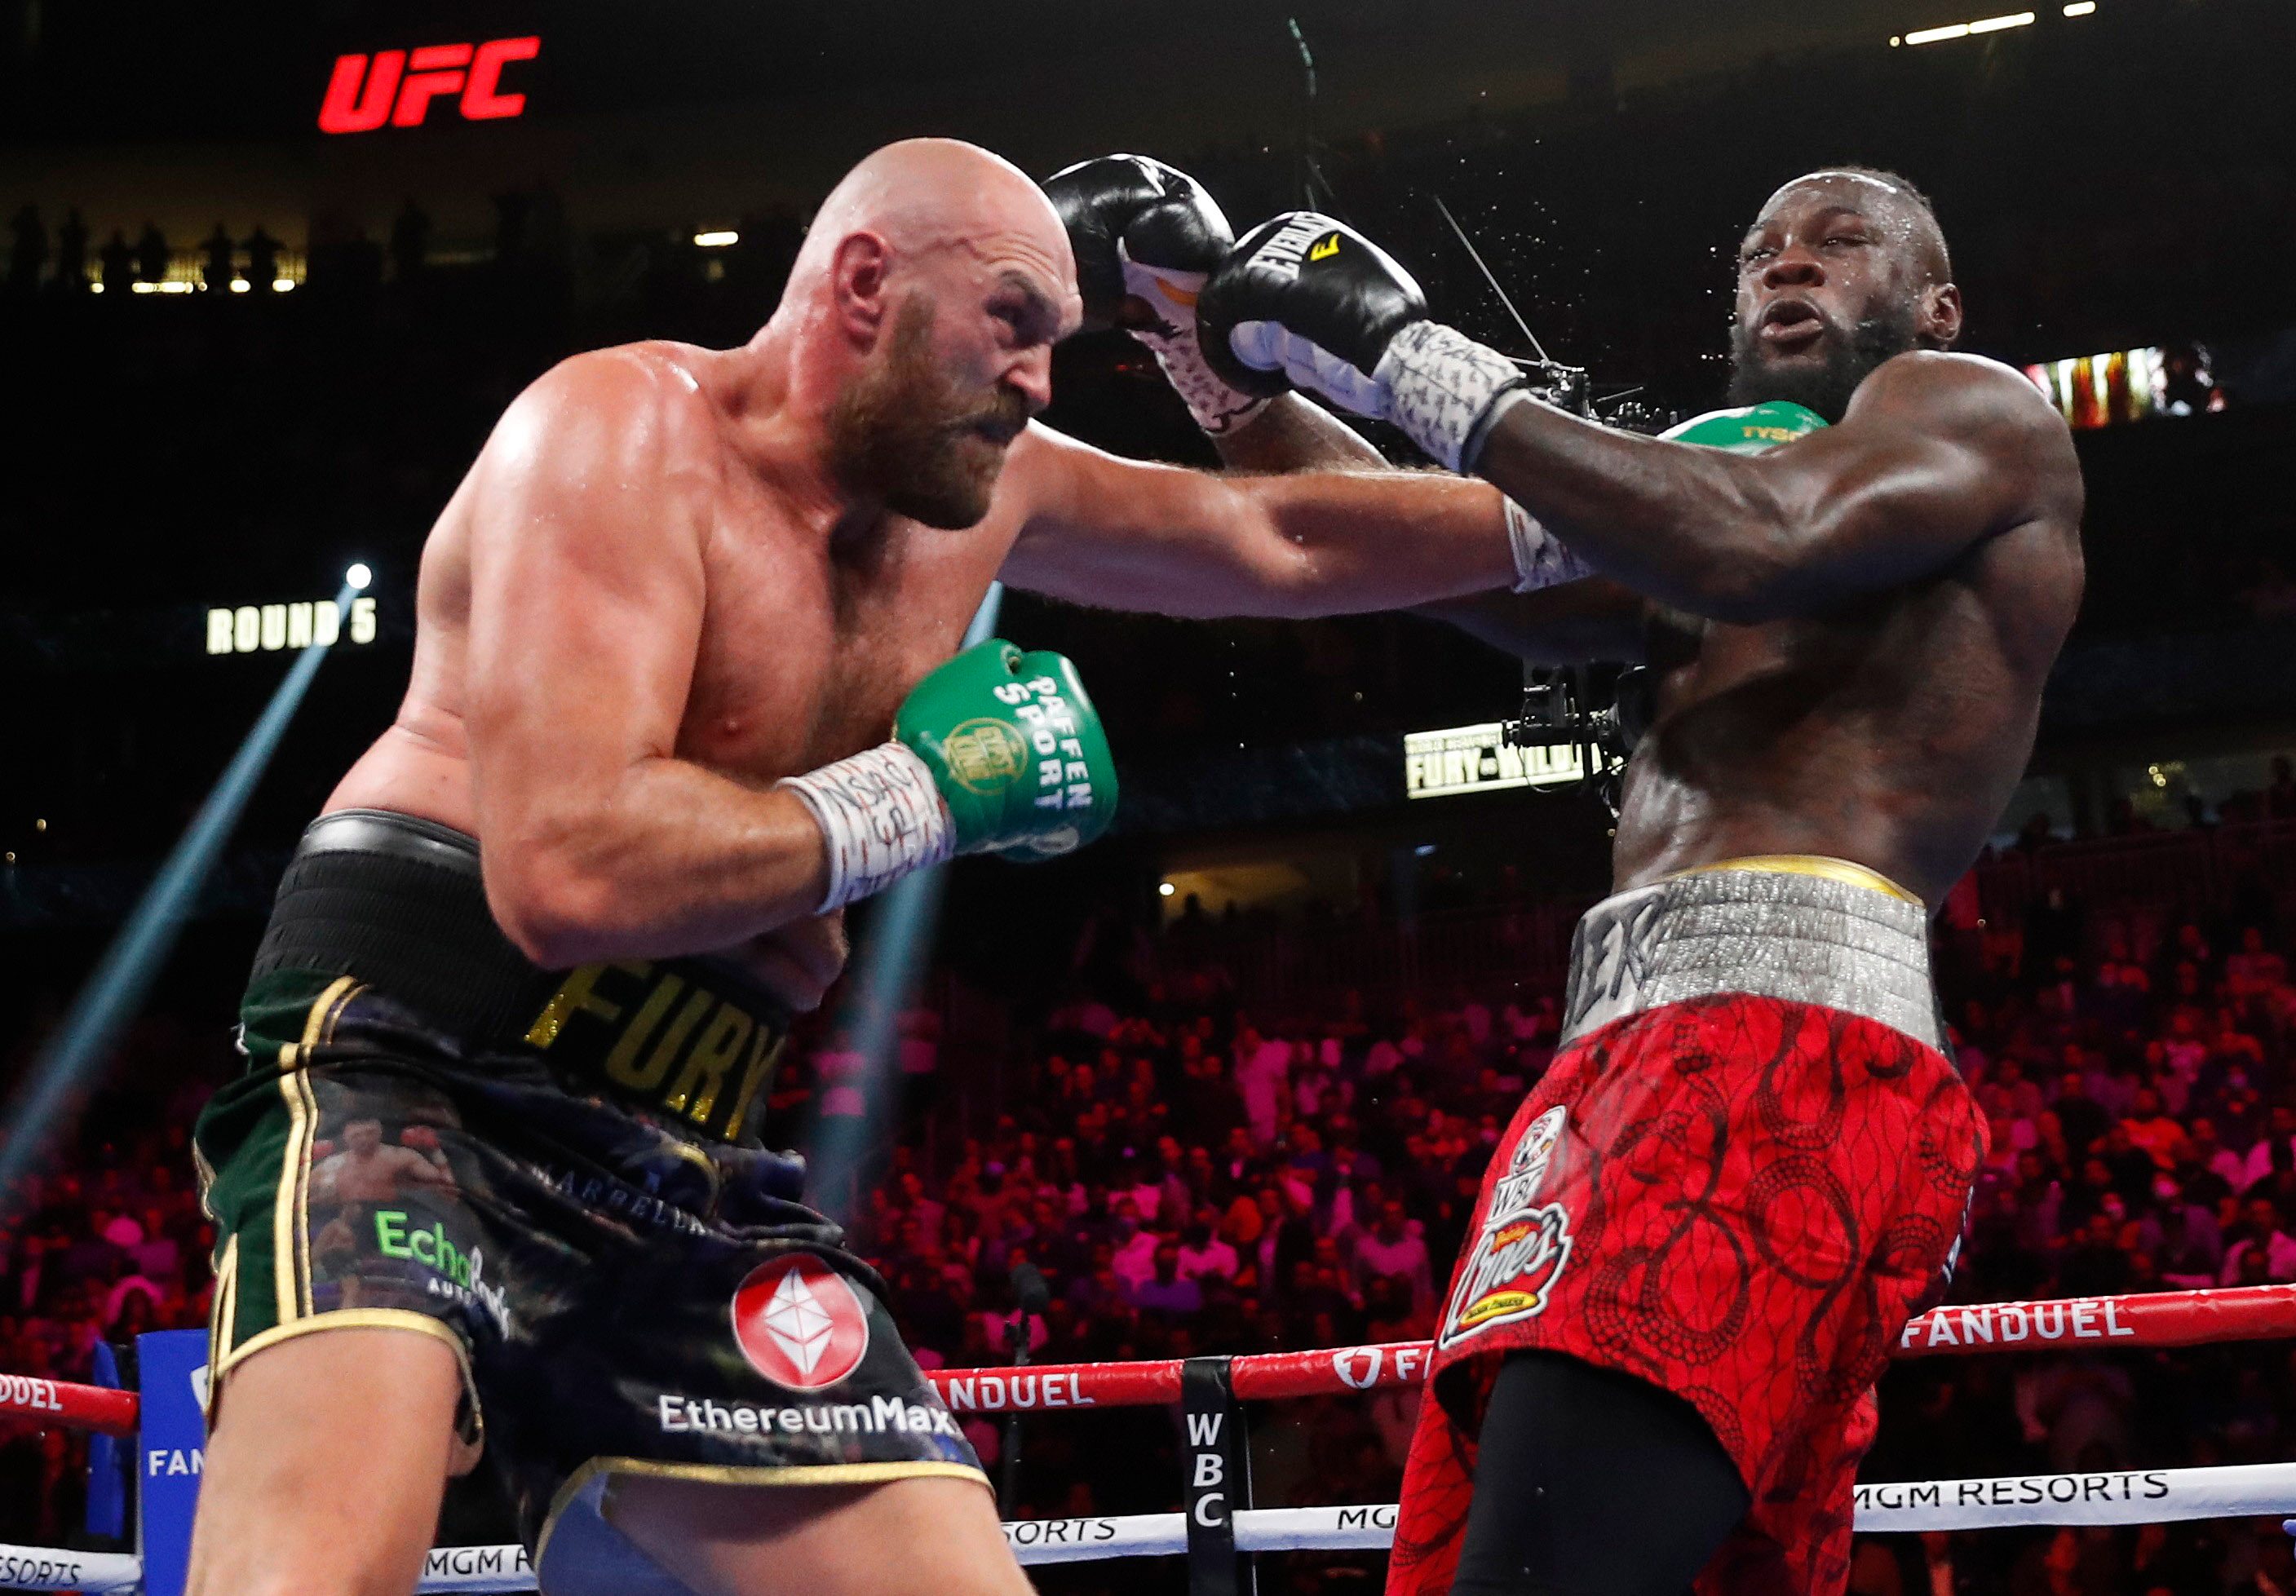 Fury defeats Wilder with 11th round knockout to retain WBC title